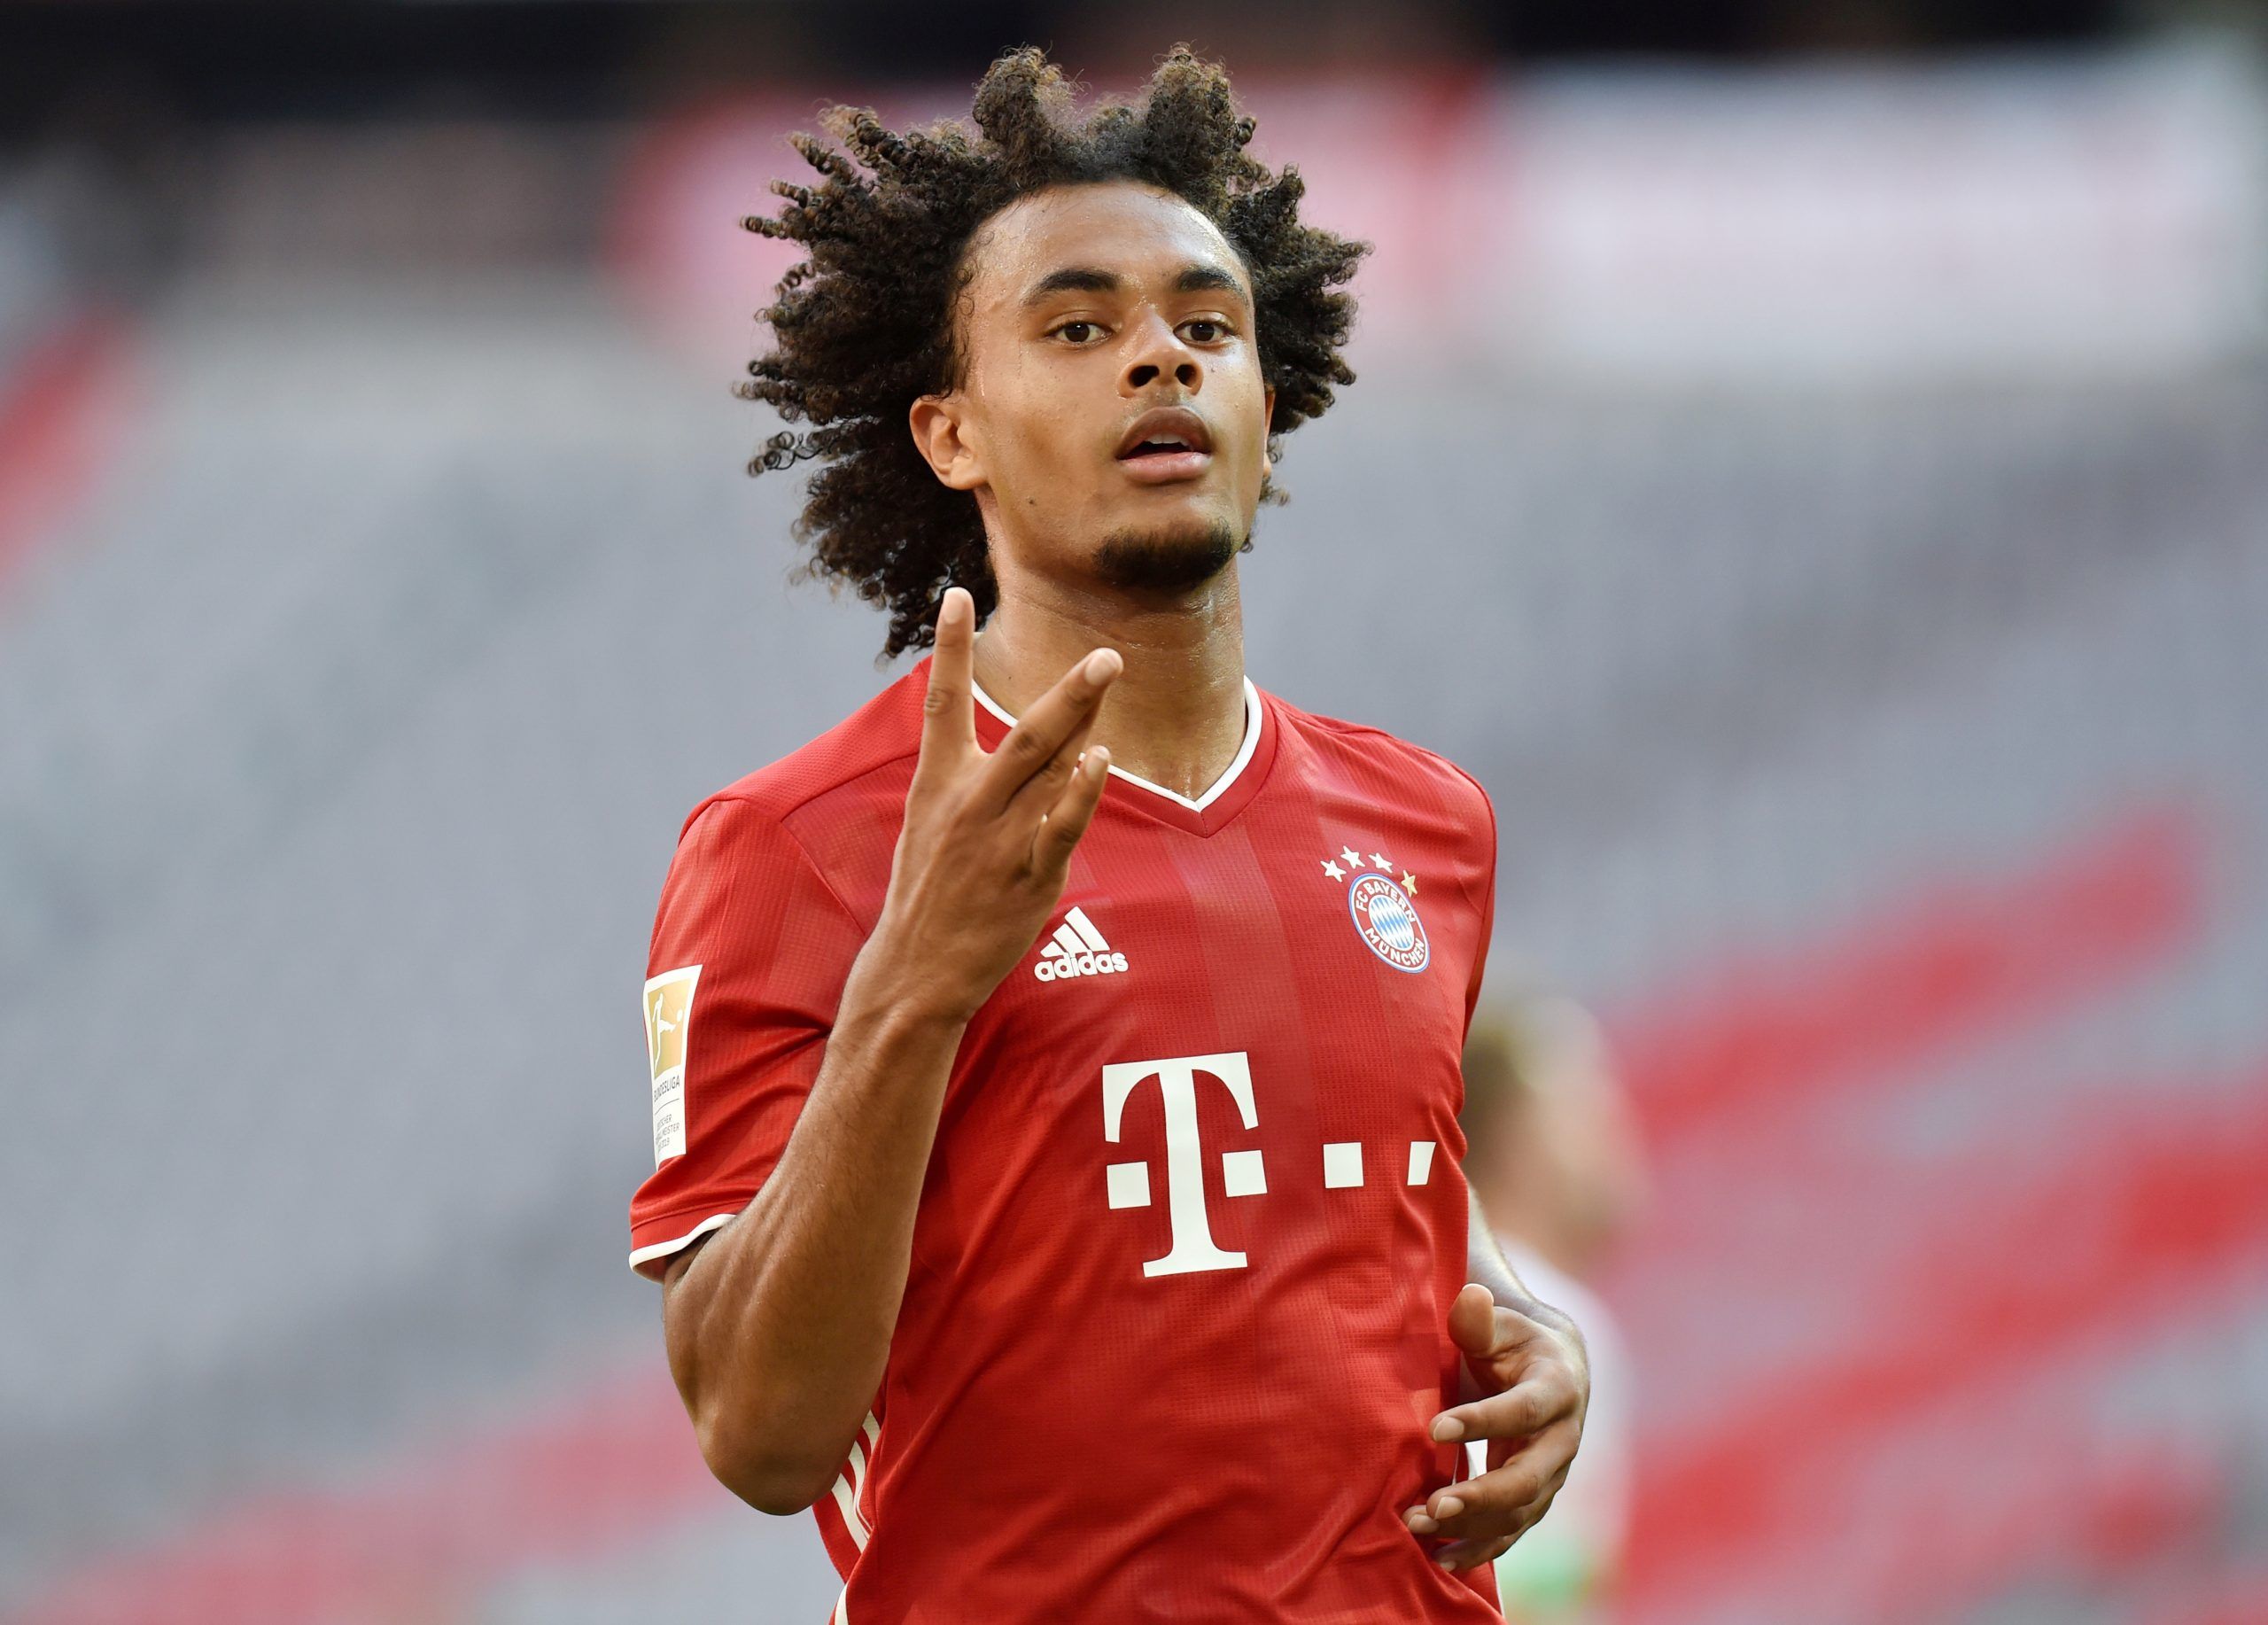 Soccer Football - Bundesliga - Bayern Munich v Borussia Moenchengladbach - Allianz Arena, Munich, Germany - June 13, 2020 Bayern Munich's Joshua Zirkzee celebrates scoring their first goal, as play resumes behind closed doors following the outbreak of the coronavirus disease (COVID-19) Christof Stache/Pool via REUTERS  DFL regulations prohibit any use of photographs as image sequences and/or quasi-video